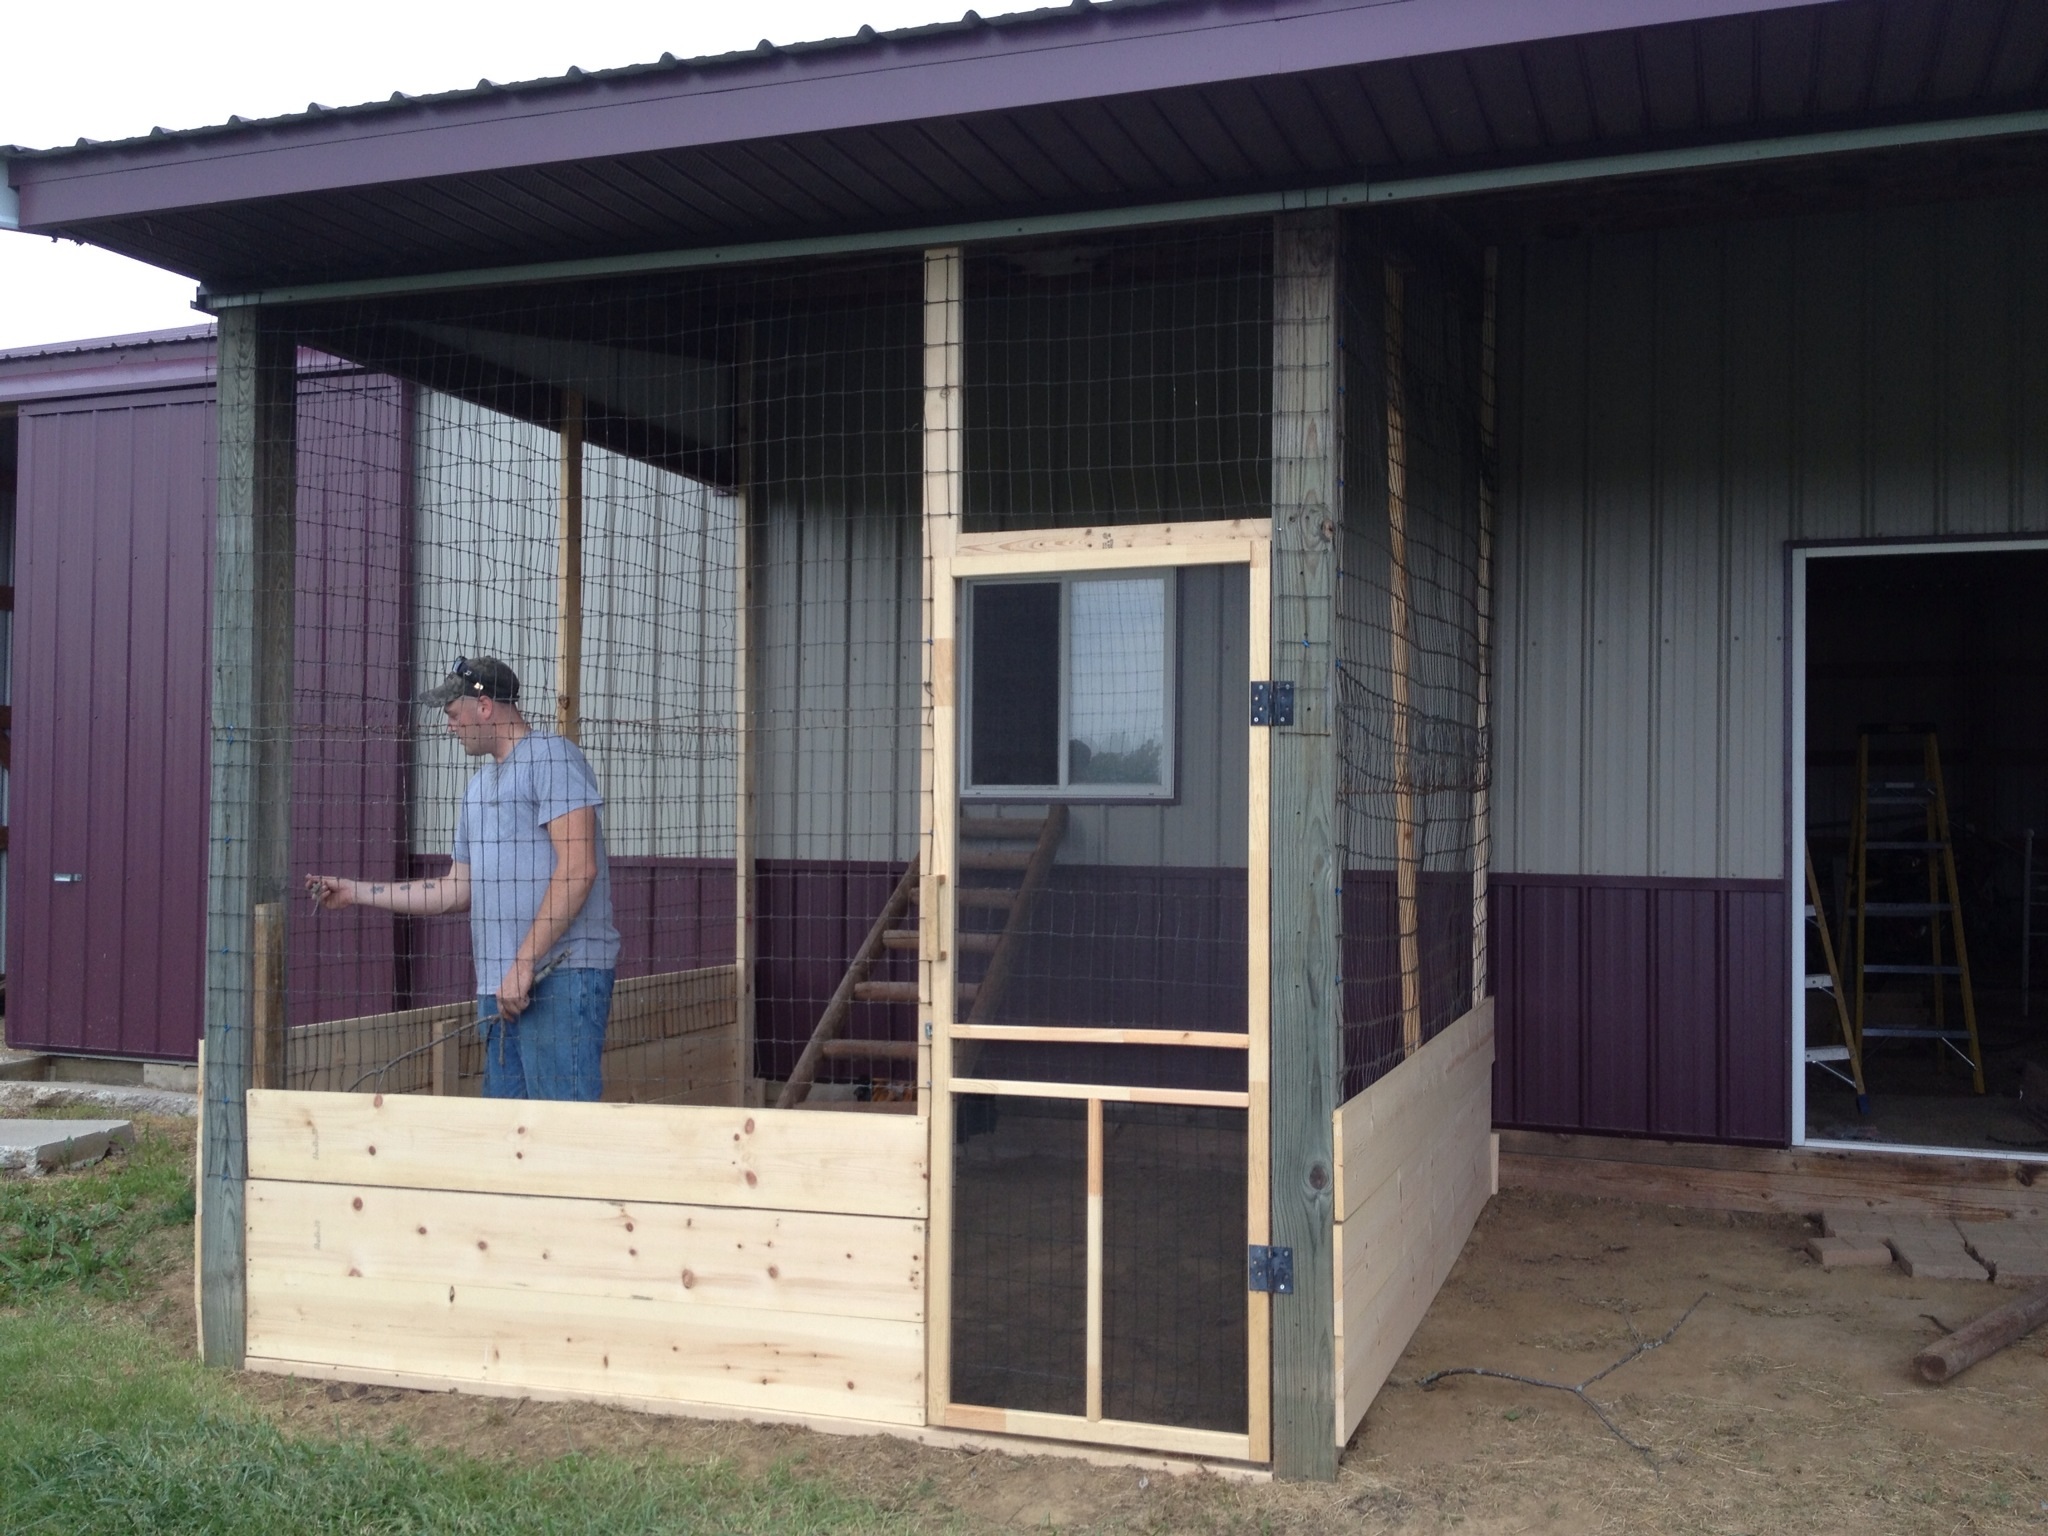 A better look at the outside coop it is currently 9ft x 10ft